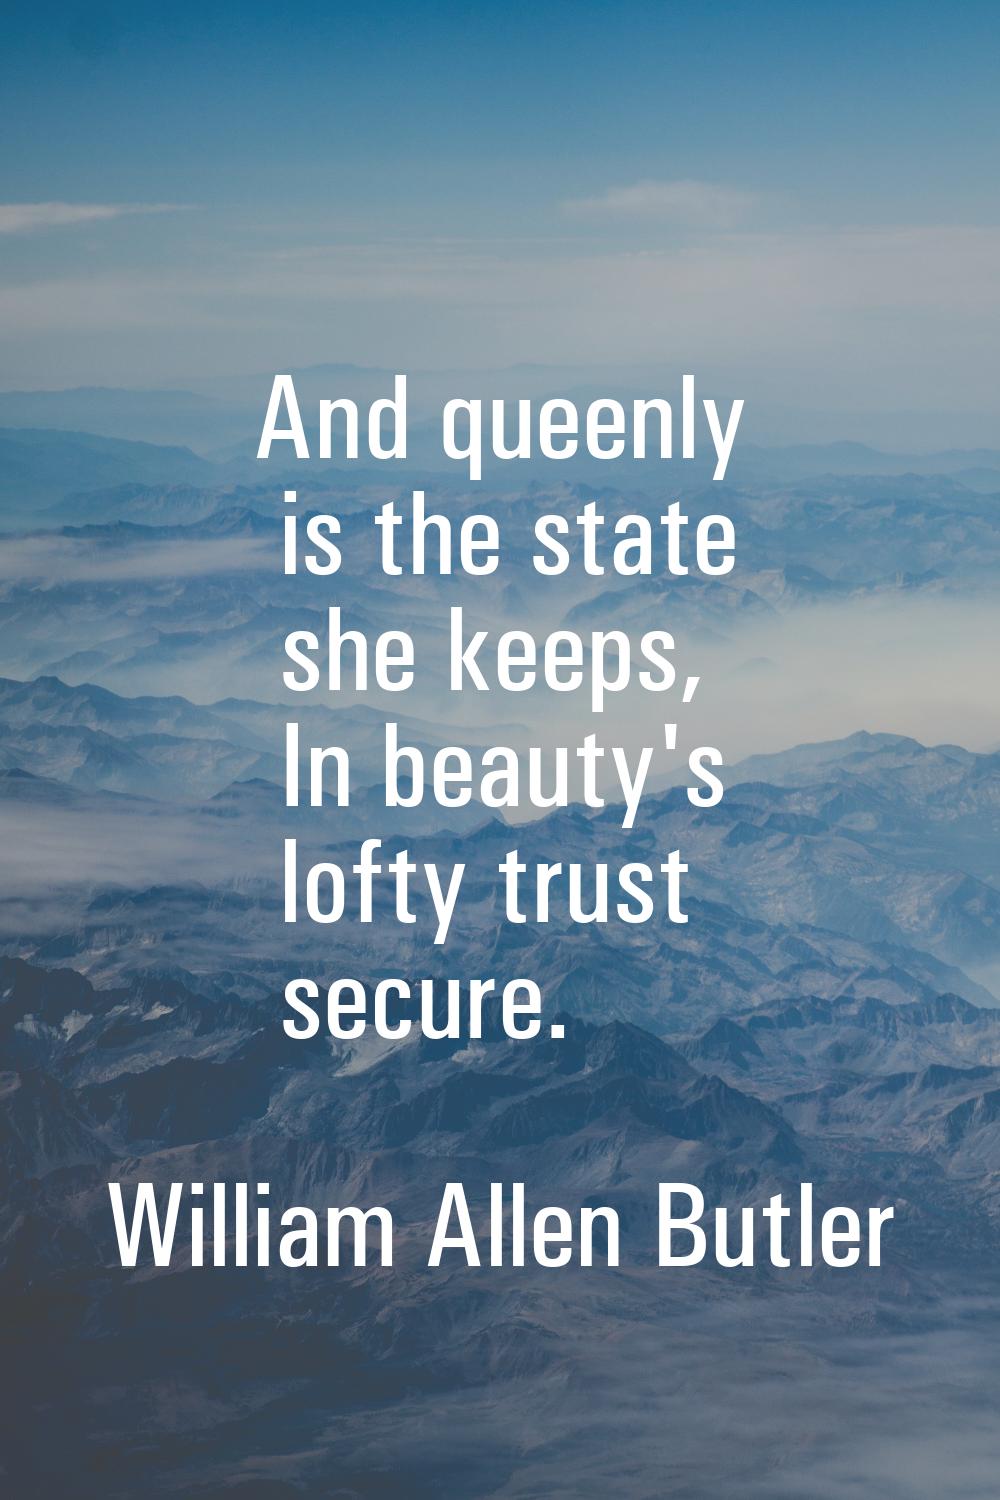 And queenly is the state she keeps, In beauty's lofty trust secure.